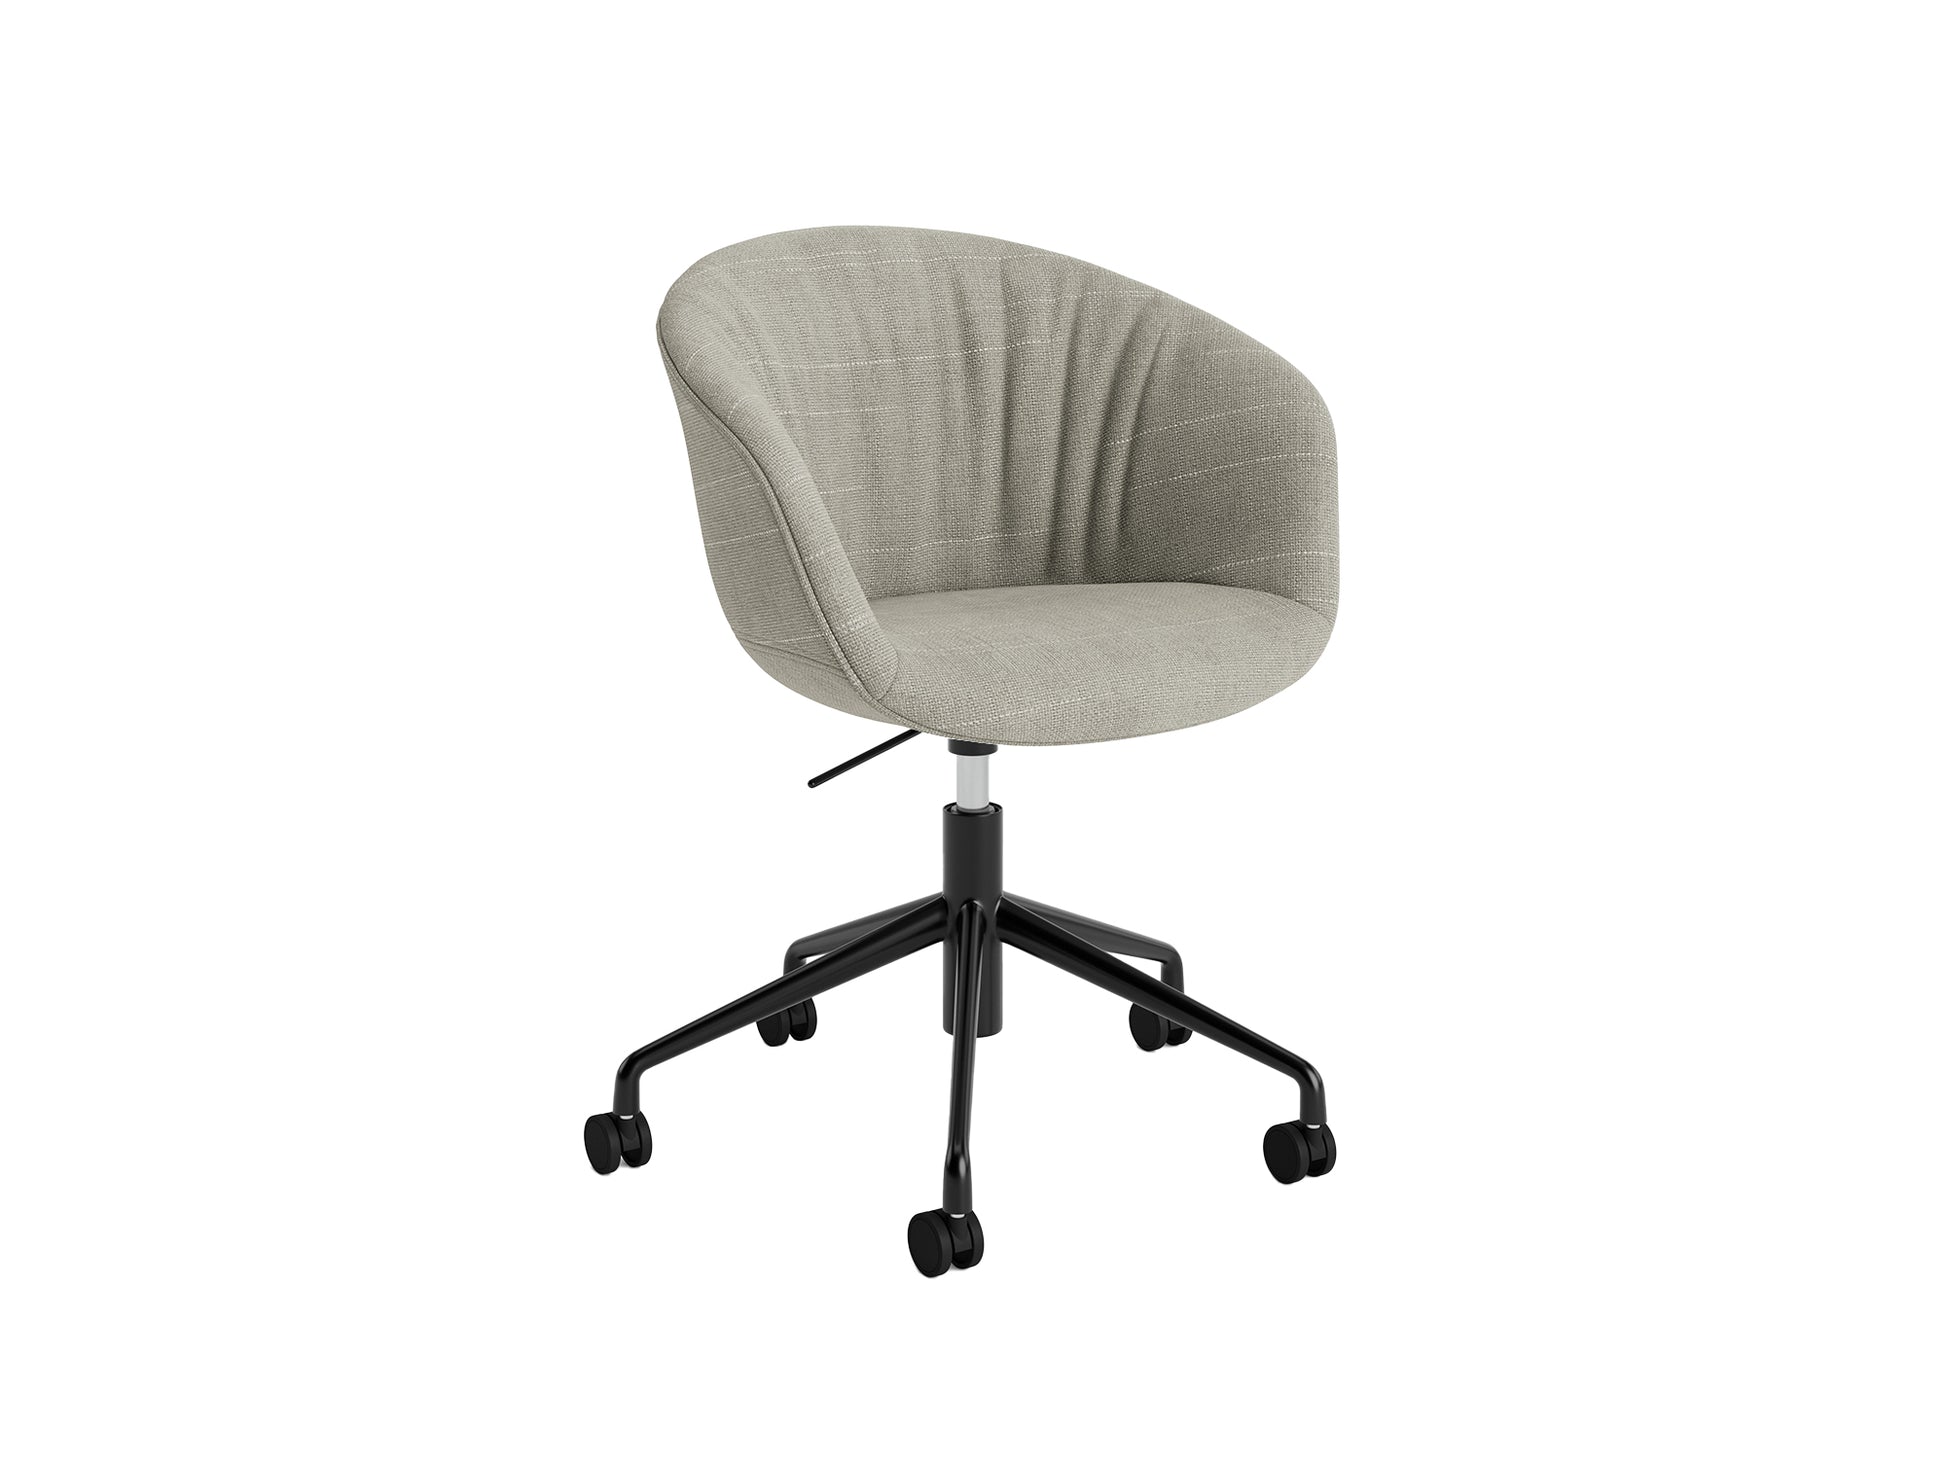 About A Chair AAC 53 Soft by HAY - Random Fade Beige / Black Powder Coated Aluminium